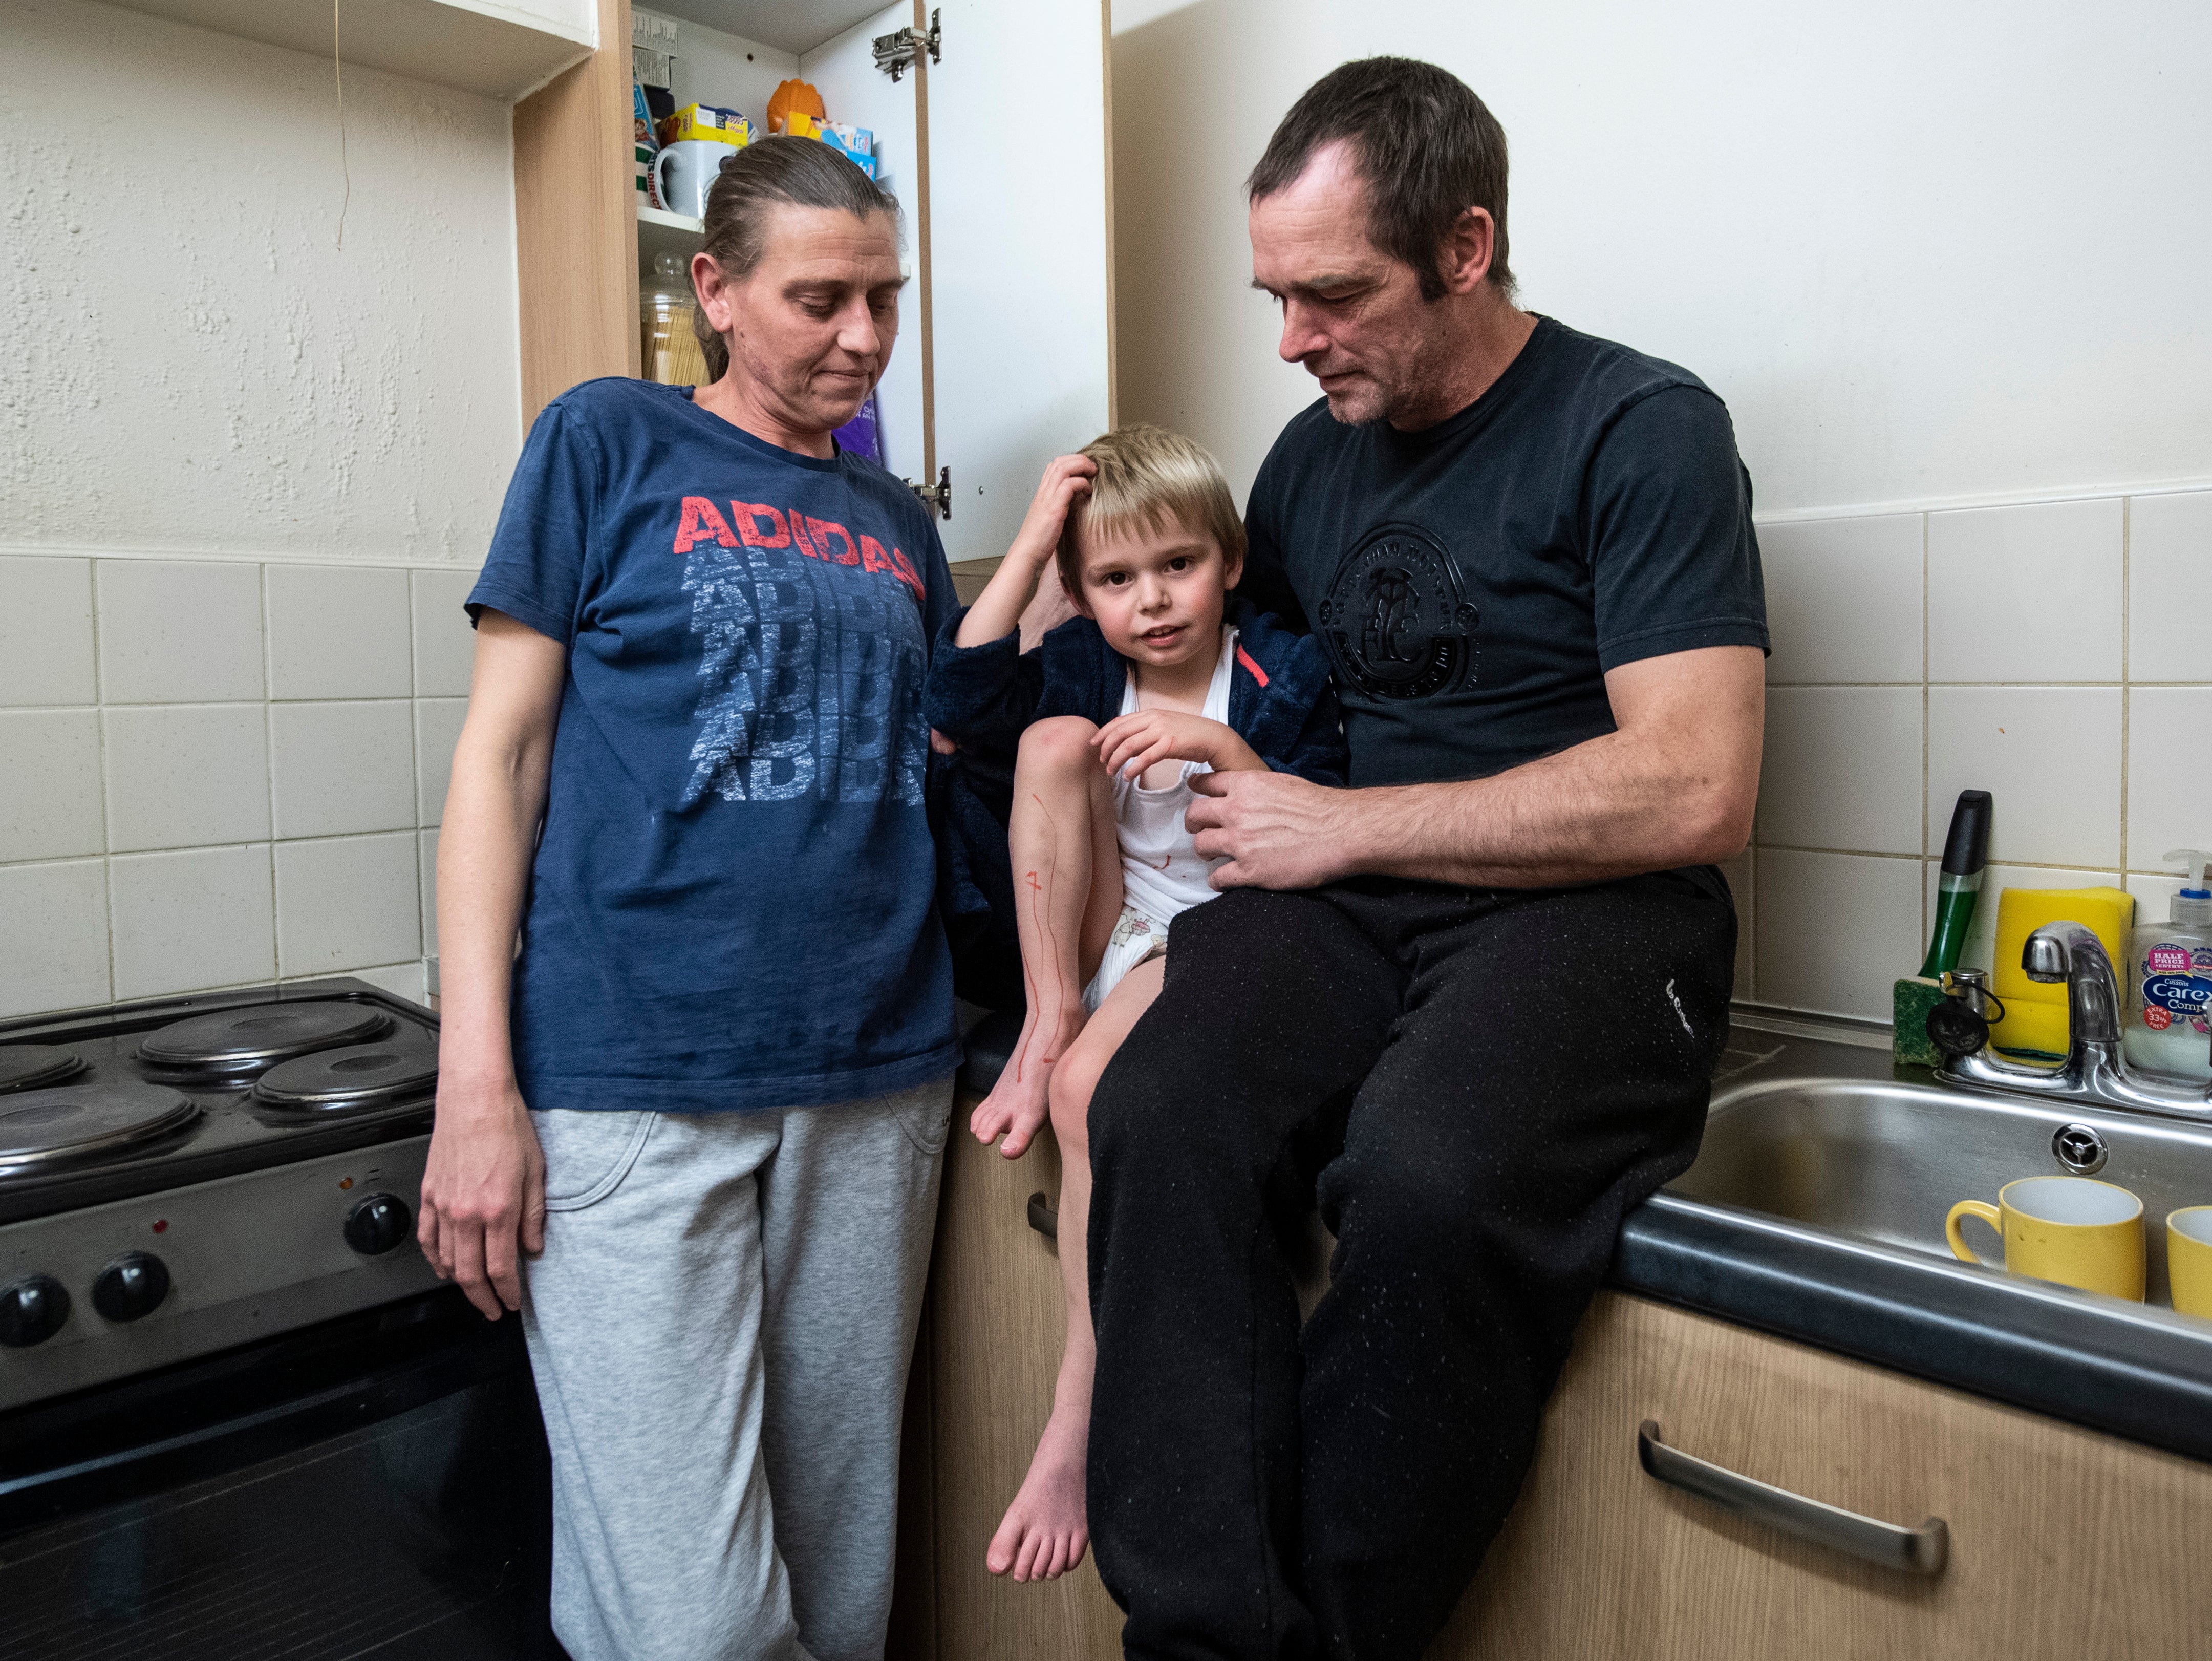 Dave, Rachel and their 4-year-old son Dee-Jay pictured in their one bedroom flat they share in Tottenham, North London.